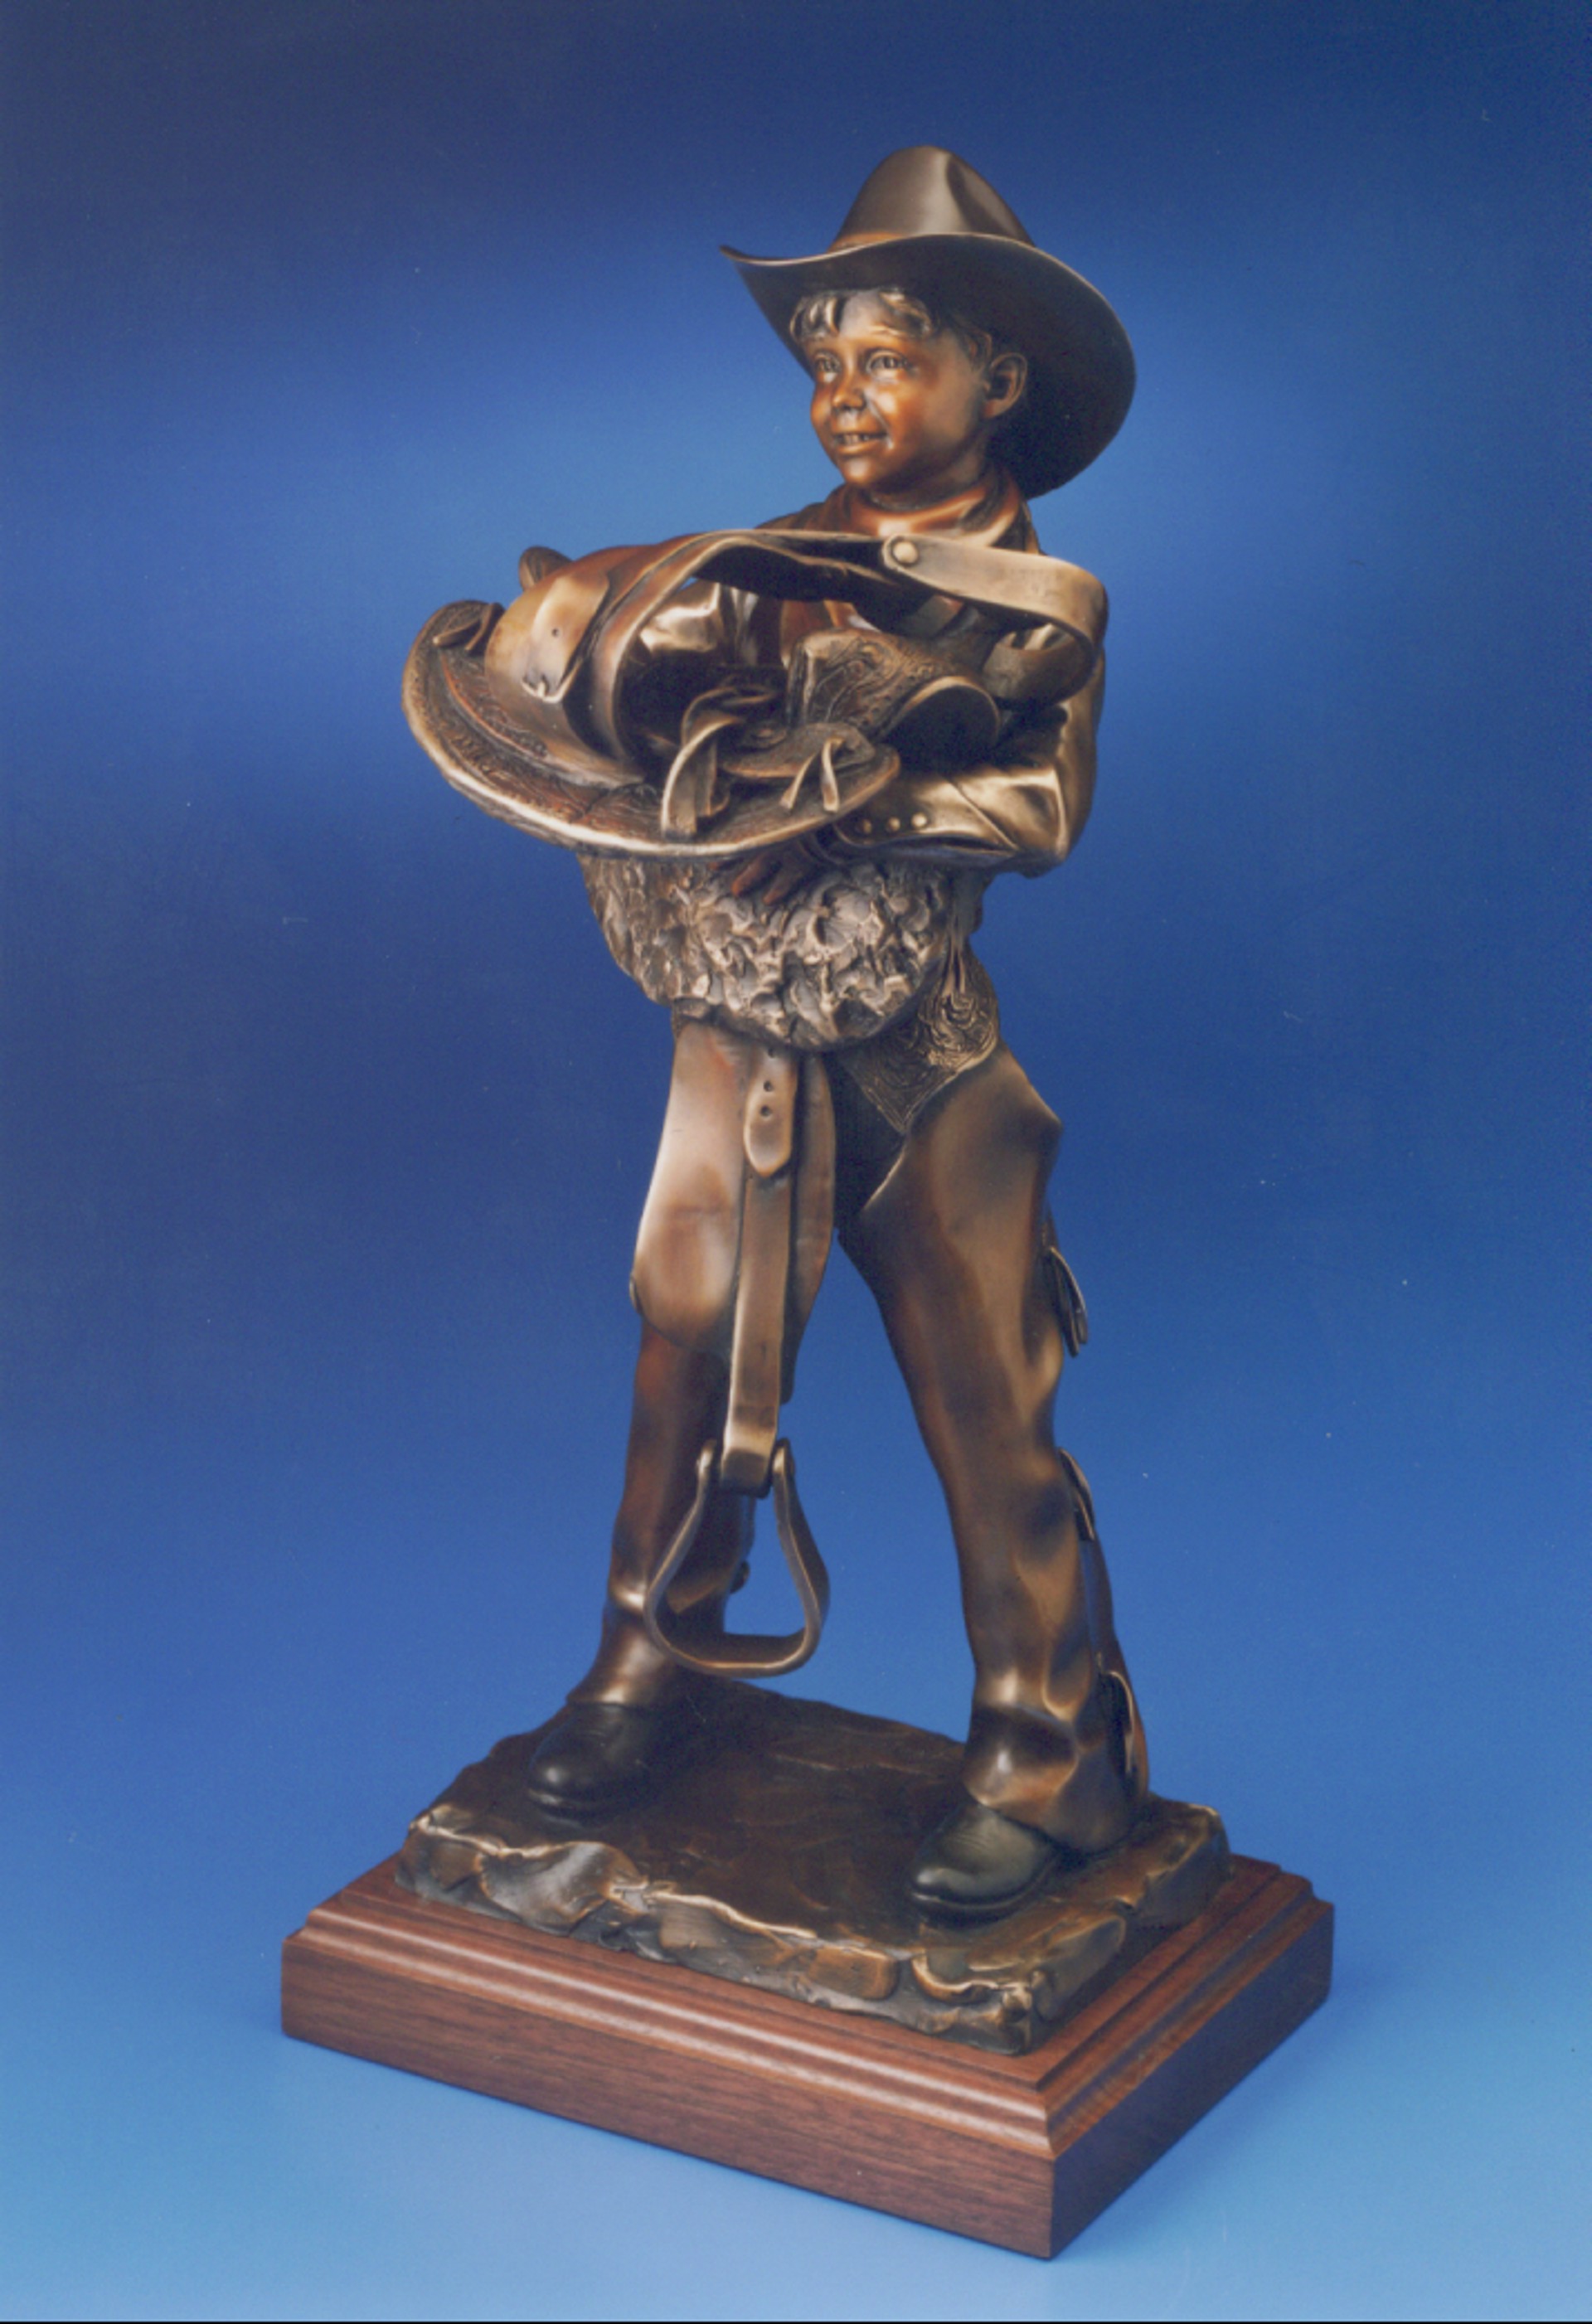 Rarin' To Ride by George Lundeen